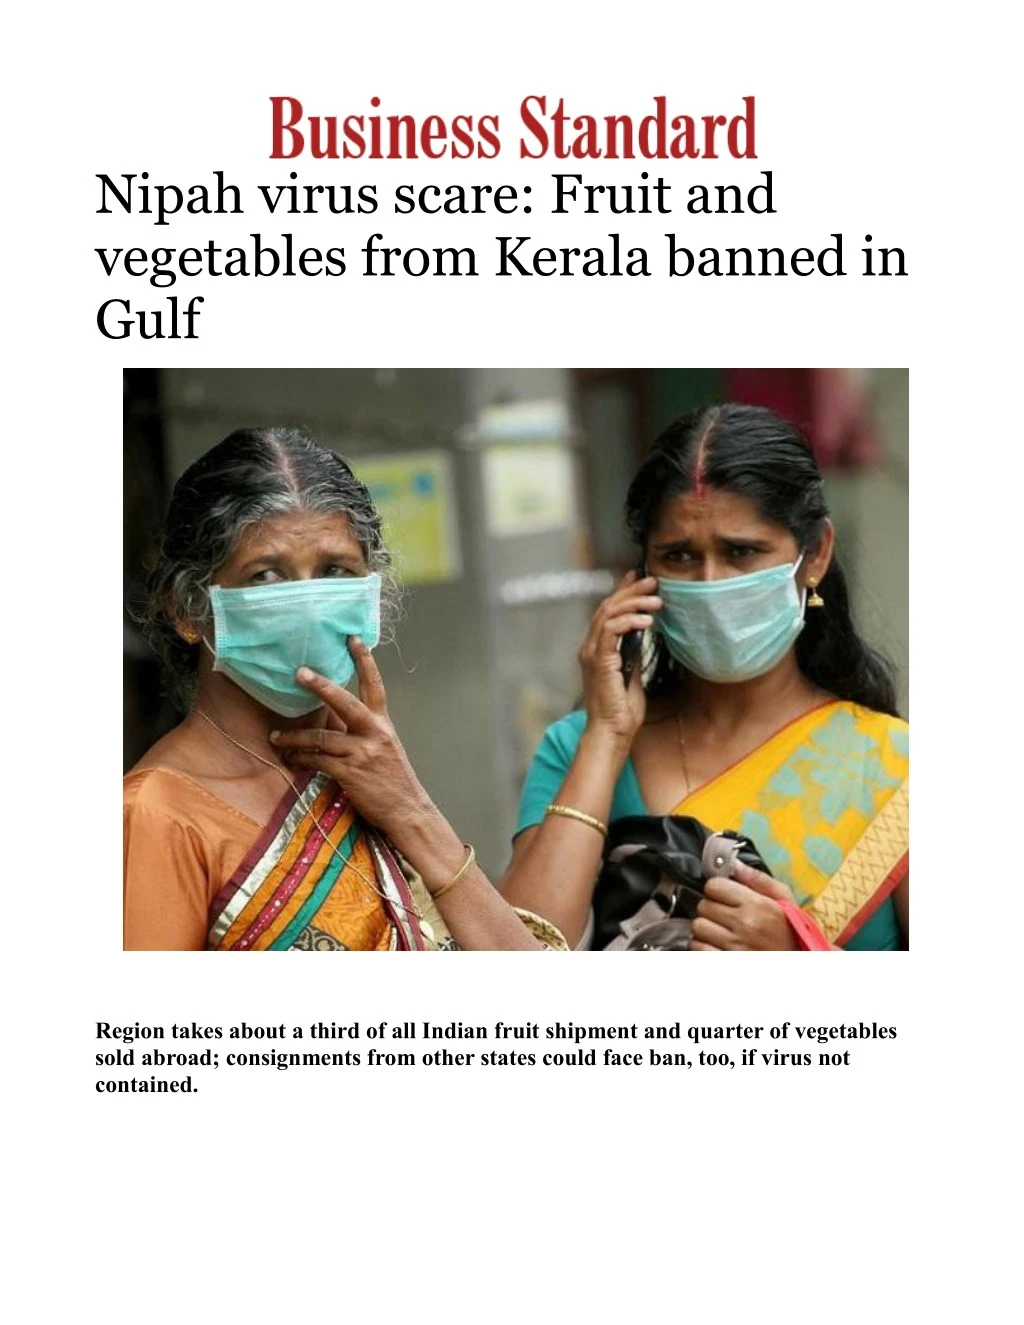 nipah virus scare fruit and vegetables from